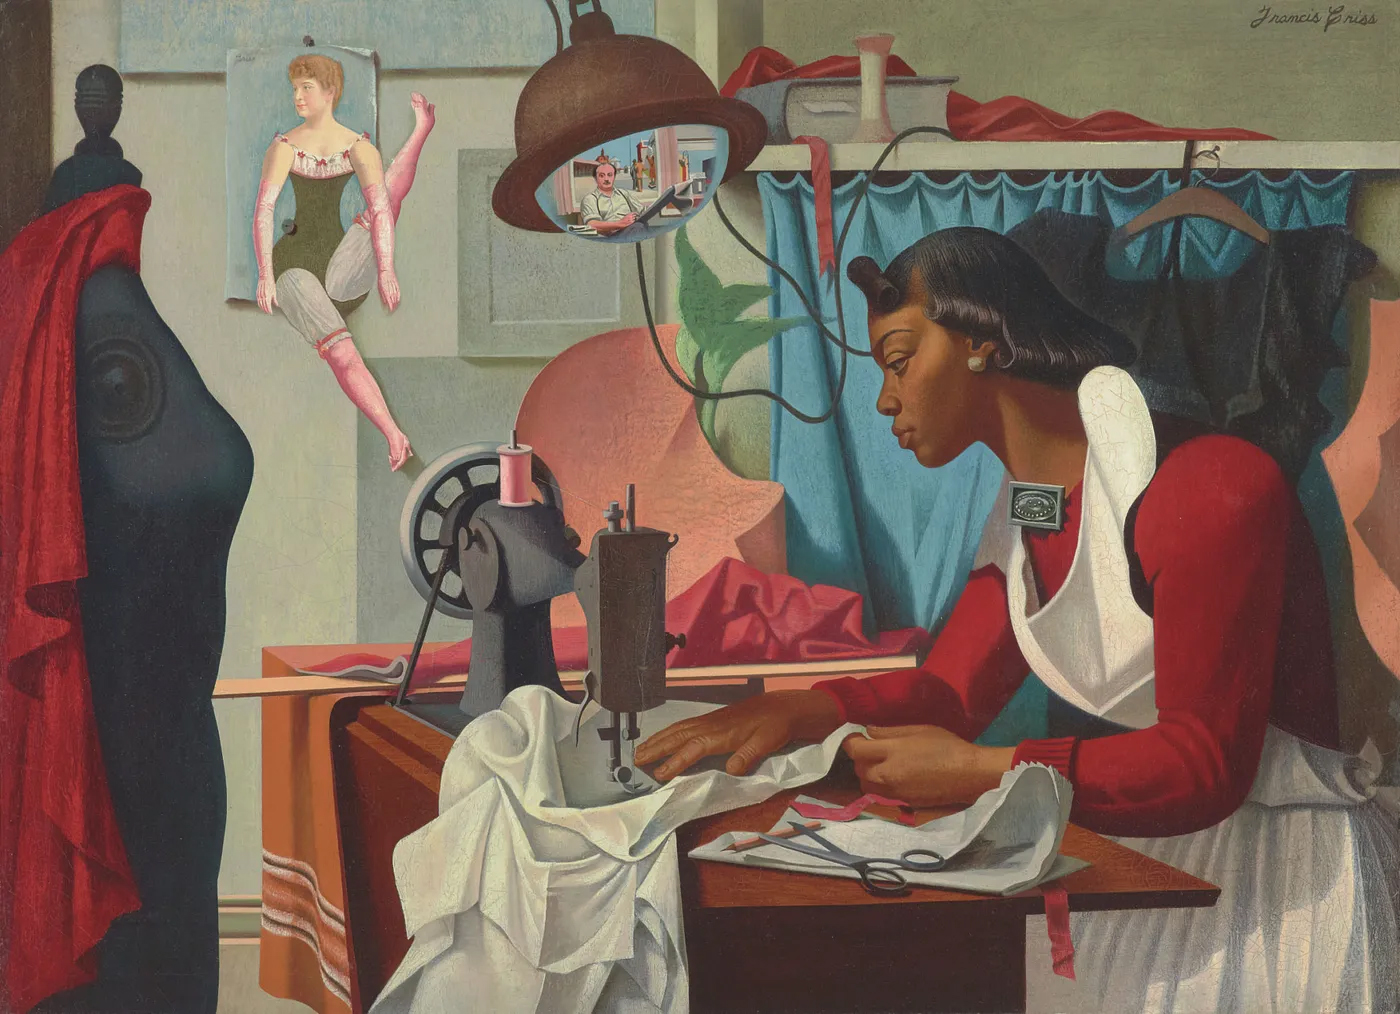 a painting of a Black woman sewing a large project